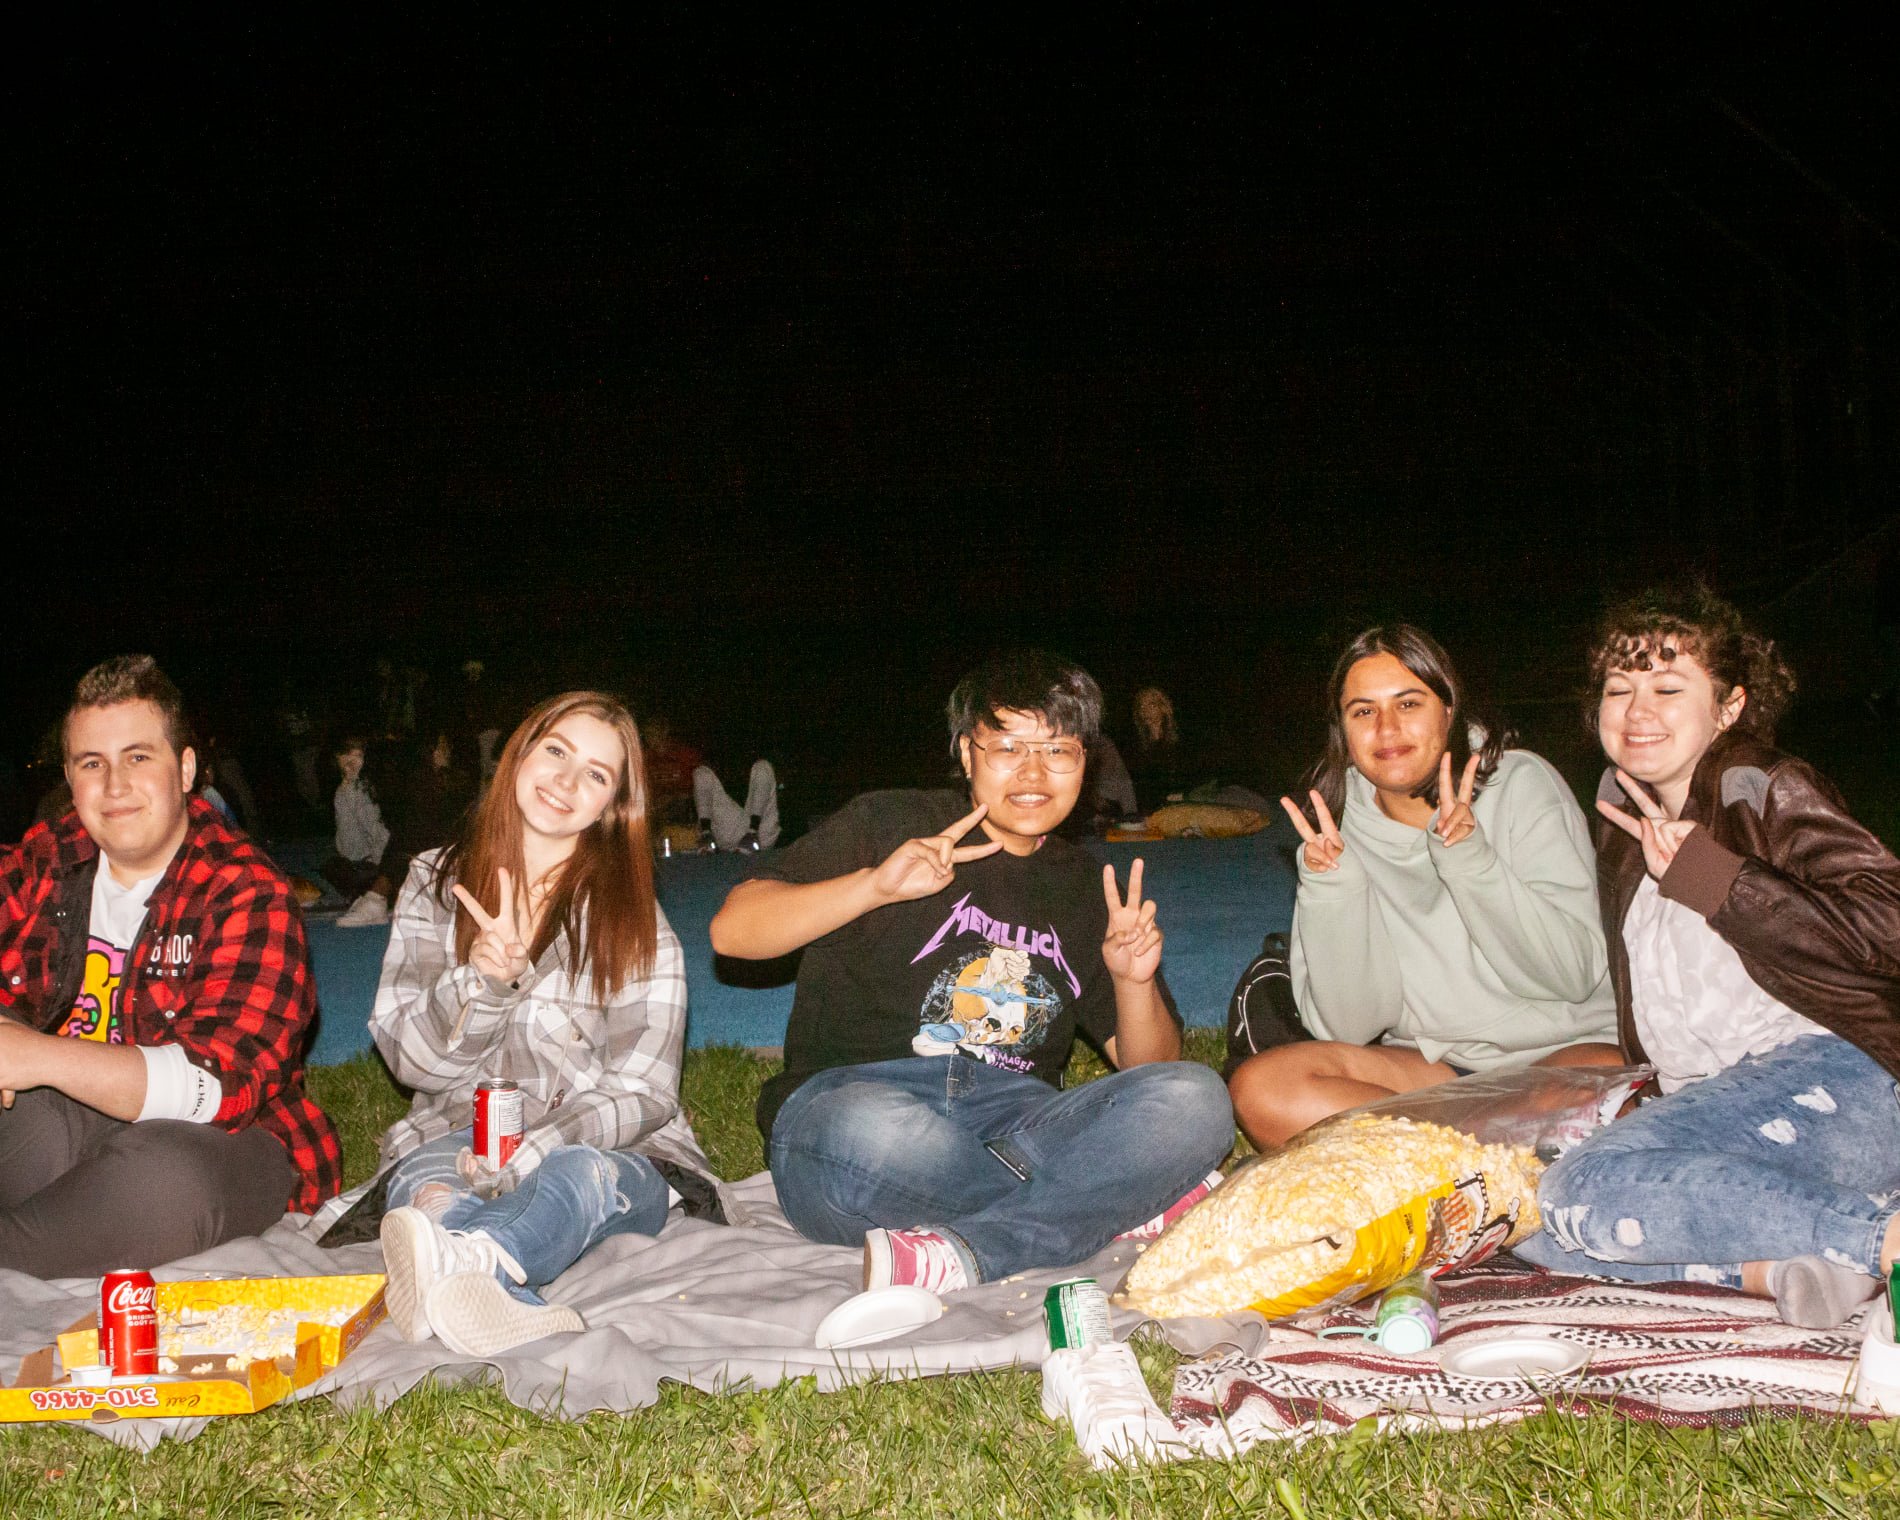  A group of 5 students sitting on the grass smiling surrounded by large popcorn bags at night.  